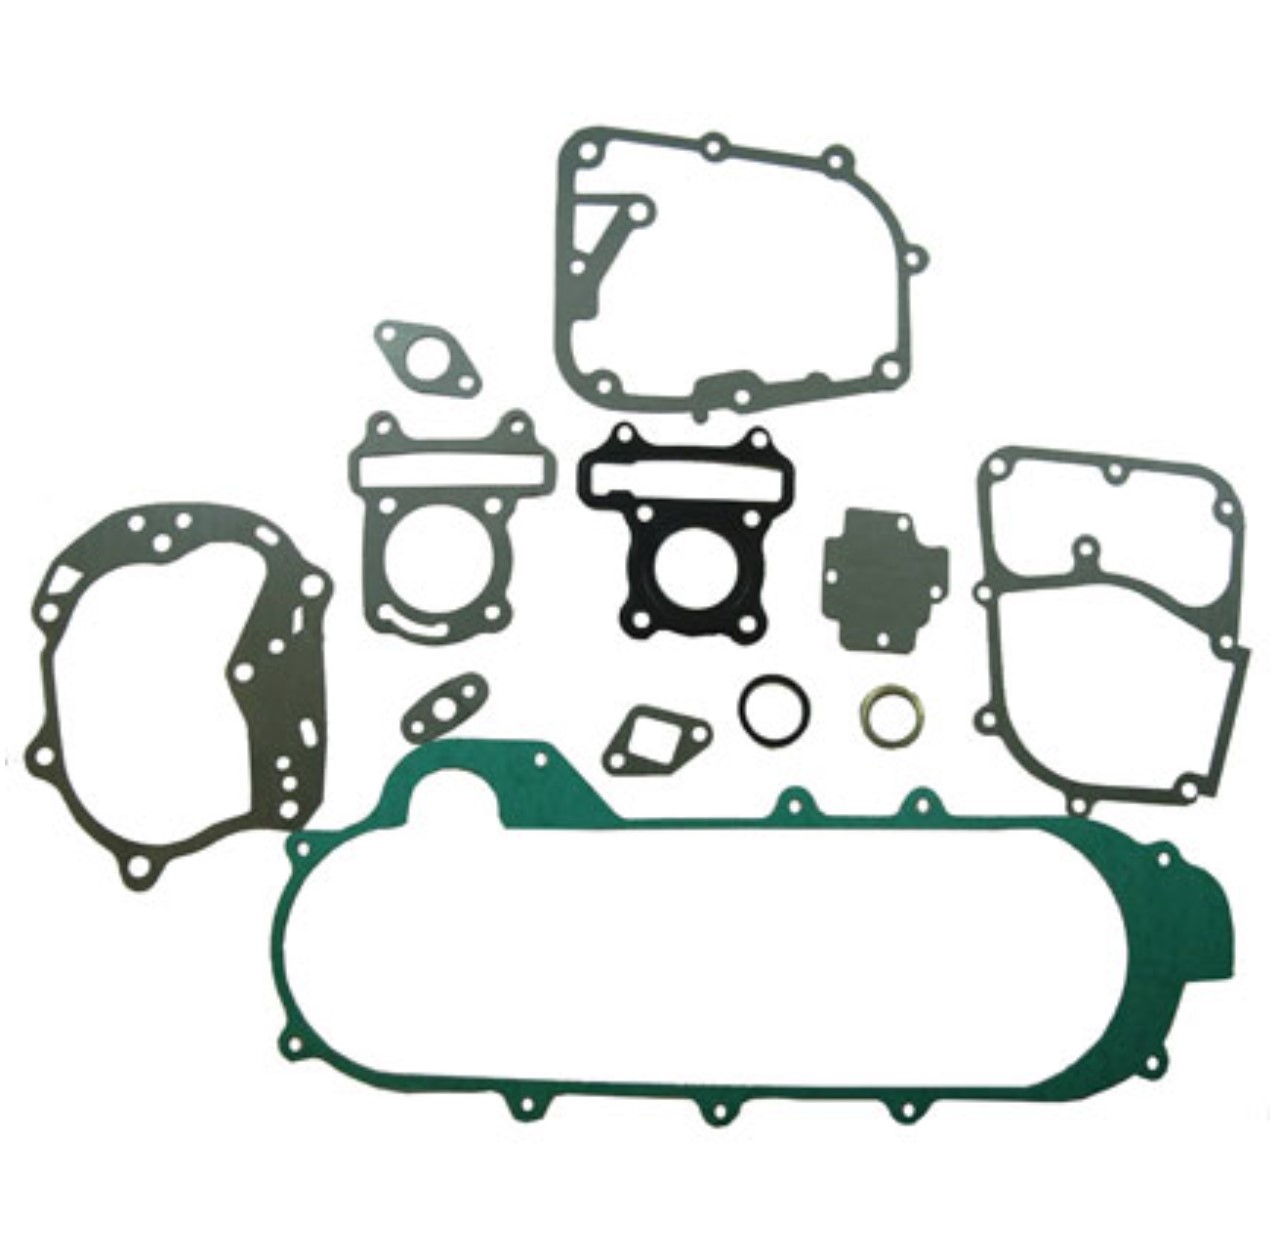 GY6 49-180cc Gaskets (QMB) Fits Most Chinese ATV-Scooter-GoKart-Motorcycles